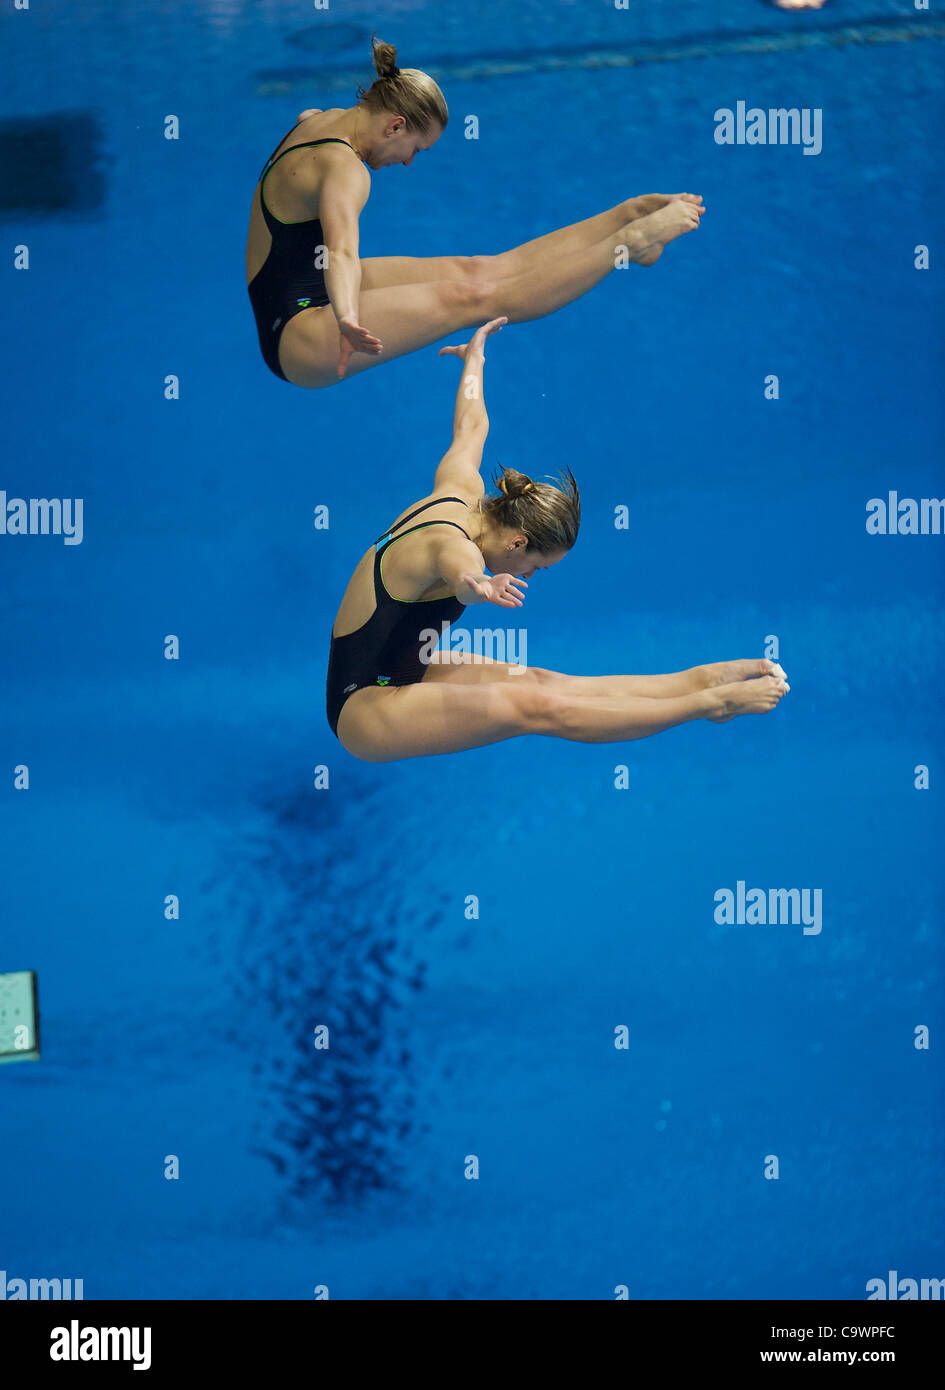 London, England, 12-02-25. Katjo DIECKOW and Nora SUBSCHINSKI (GER) competing in the women's 3m spring board at the 18th FINA Visa World Cup Diving, Olympic Aquatics Centre. Part of the London Prepares Olympic preparations. Stock Photo